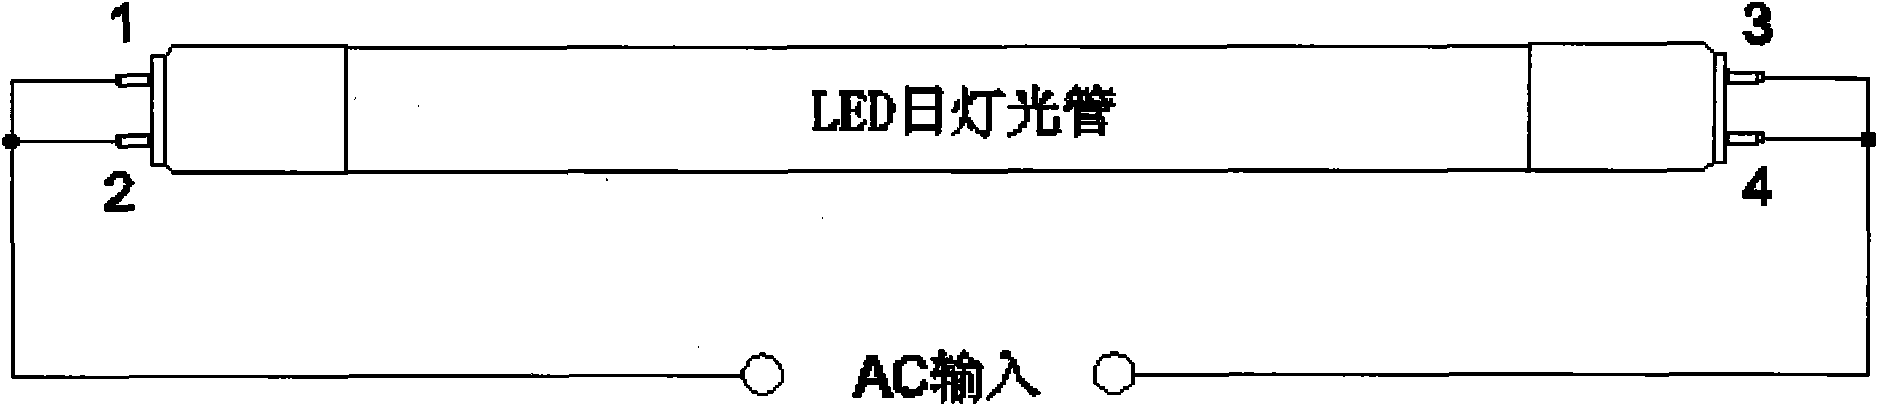 LED (light emitting diode) fluorescent lamp and fluorescent lamp connecting circuit